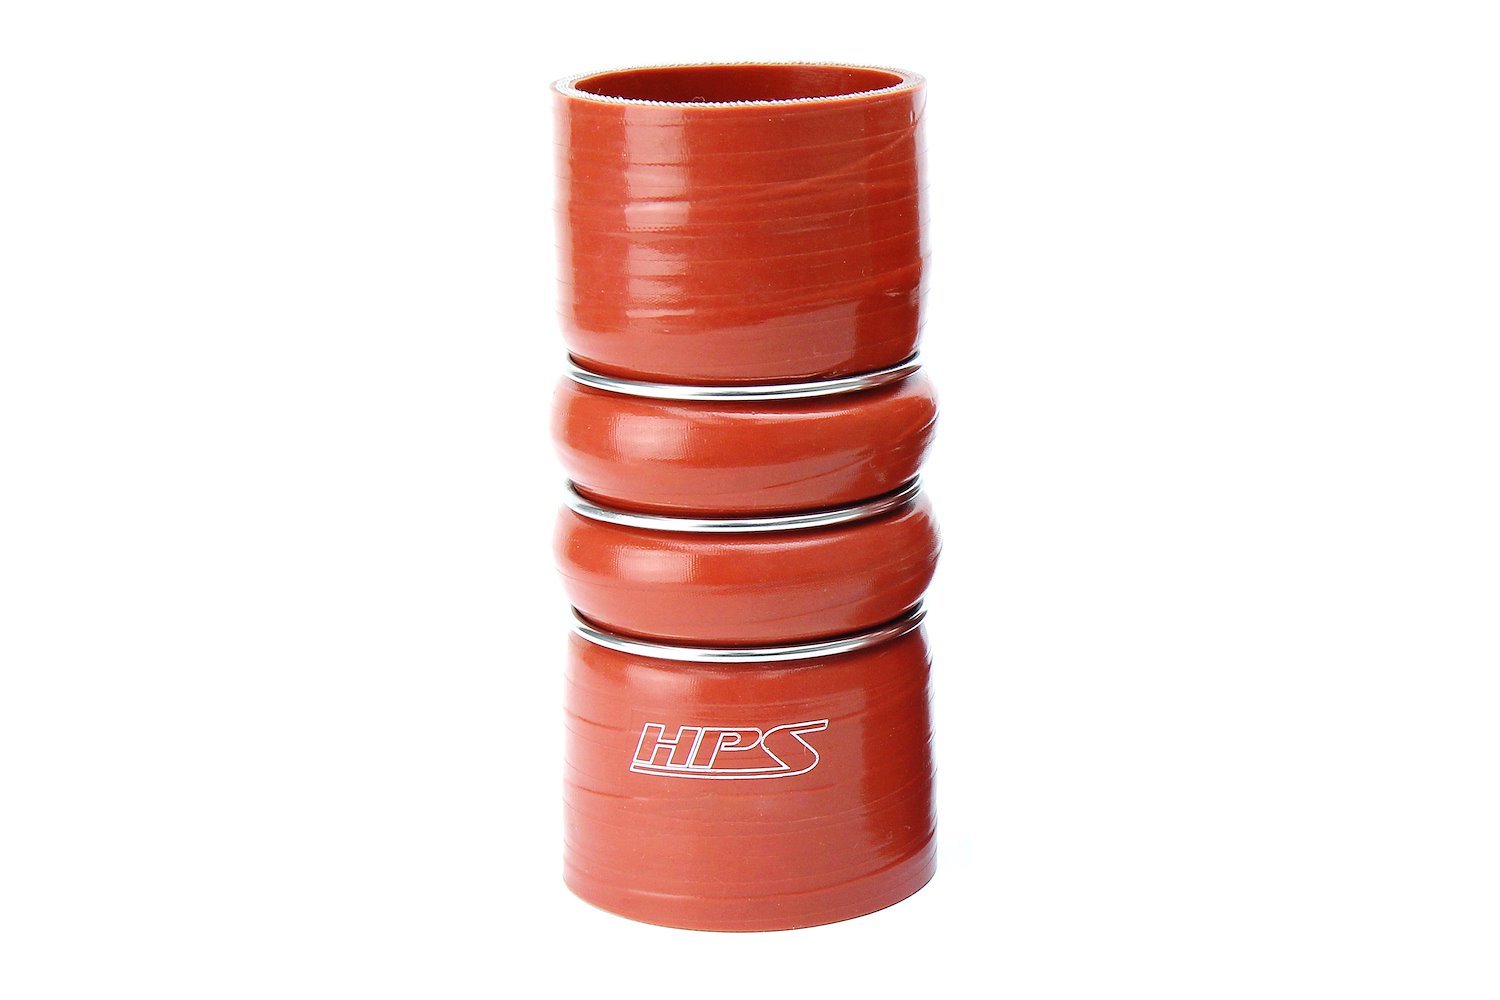 CAC-500-L7-HOT Silicone CAC Hose, Silicone CAC Hump Hose Hot, High-Temp 4-Ply Aramid Reinforced, 5 in. ID, 7 in. Long